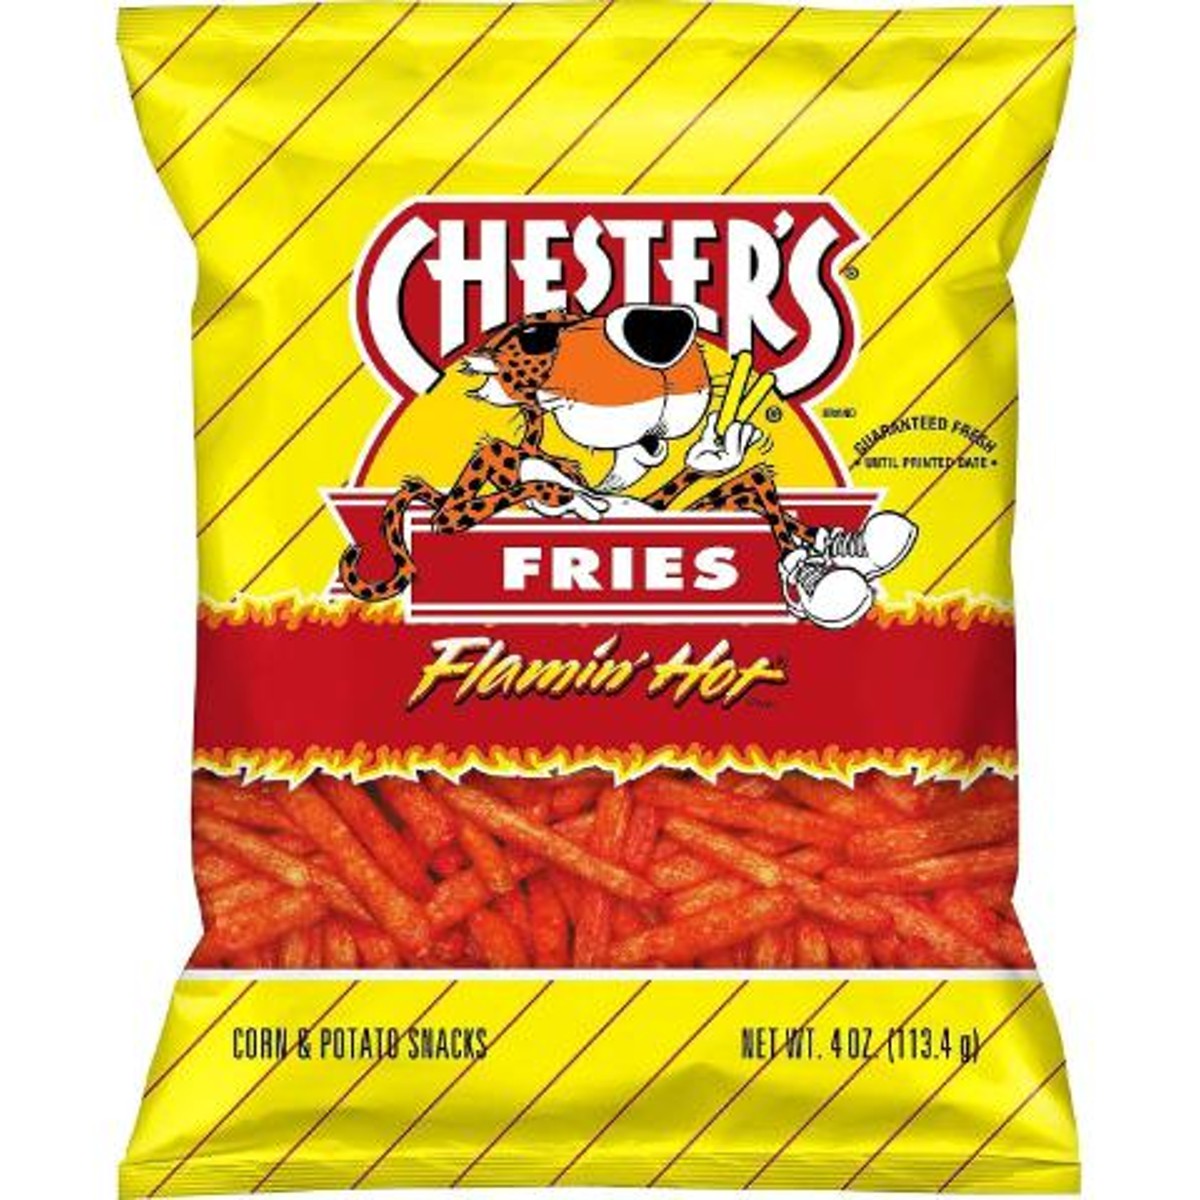 Hot Chips Variety Pack - Takis Fuego, Flamin' Hot Cheetos, and Chester's  Hot Fries Pack of 12 with a Mystery Item, Perfect Snack with a Surprise